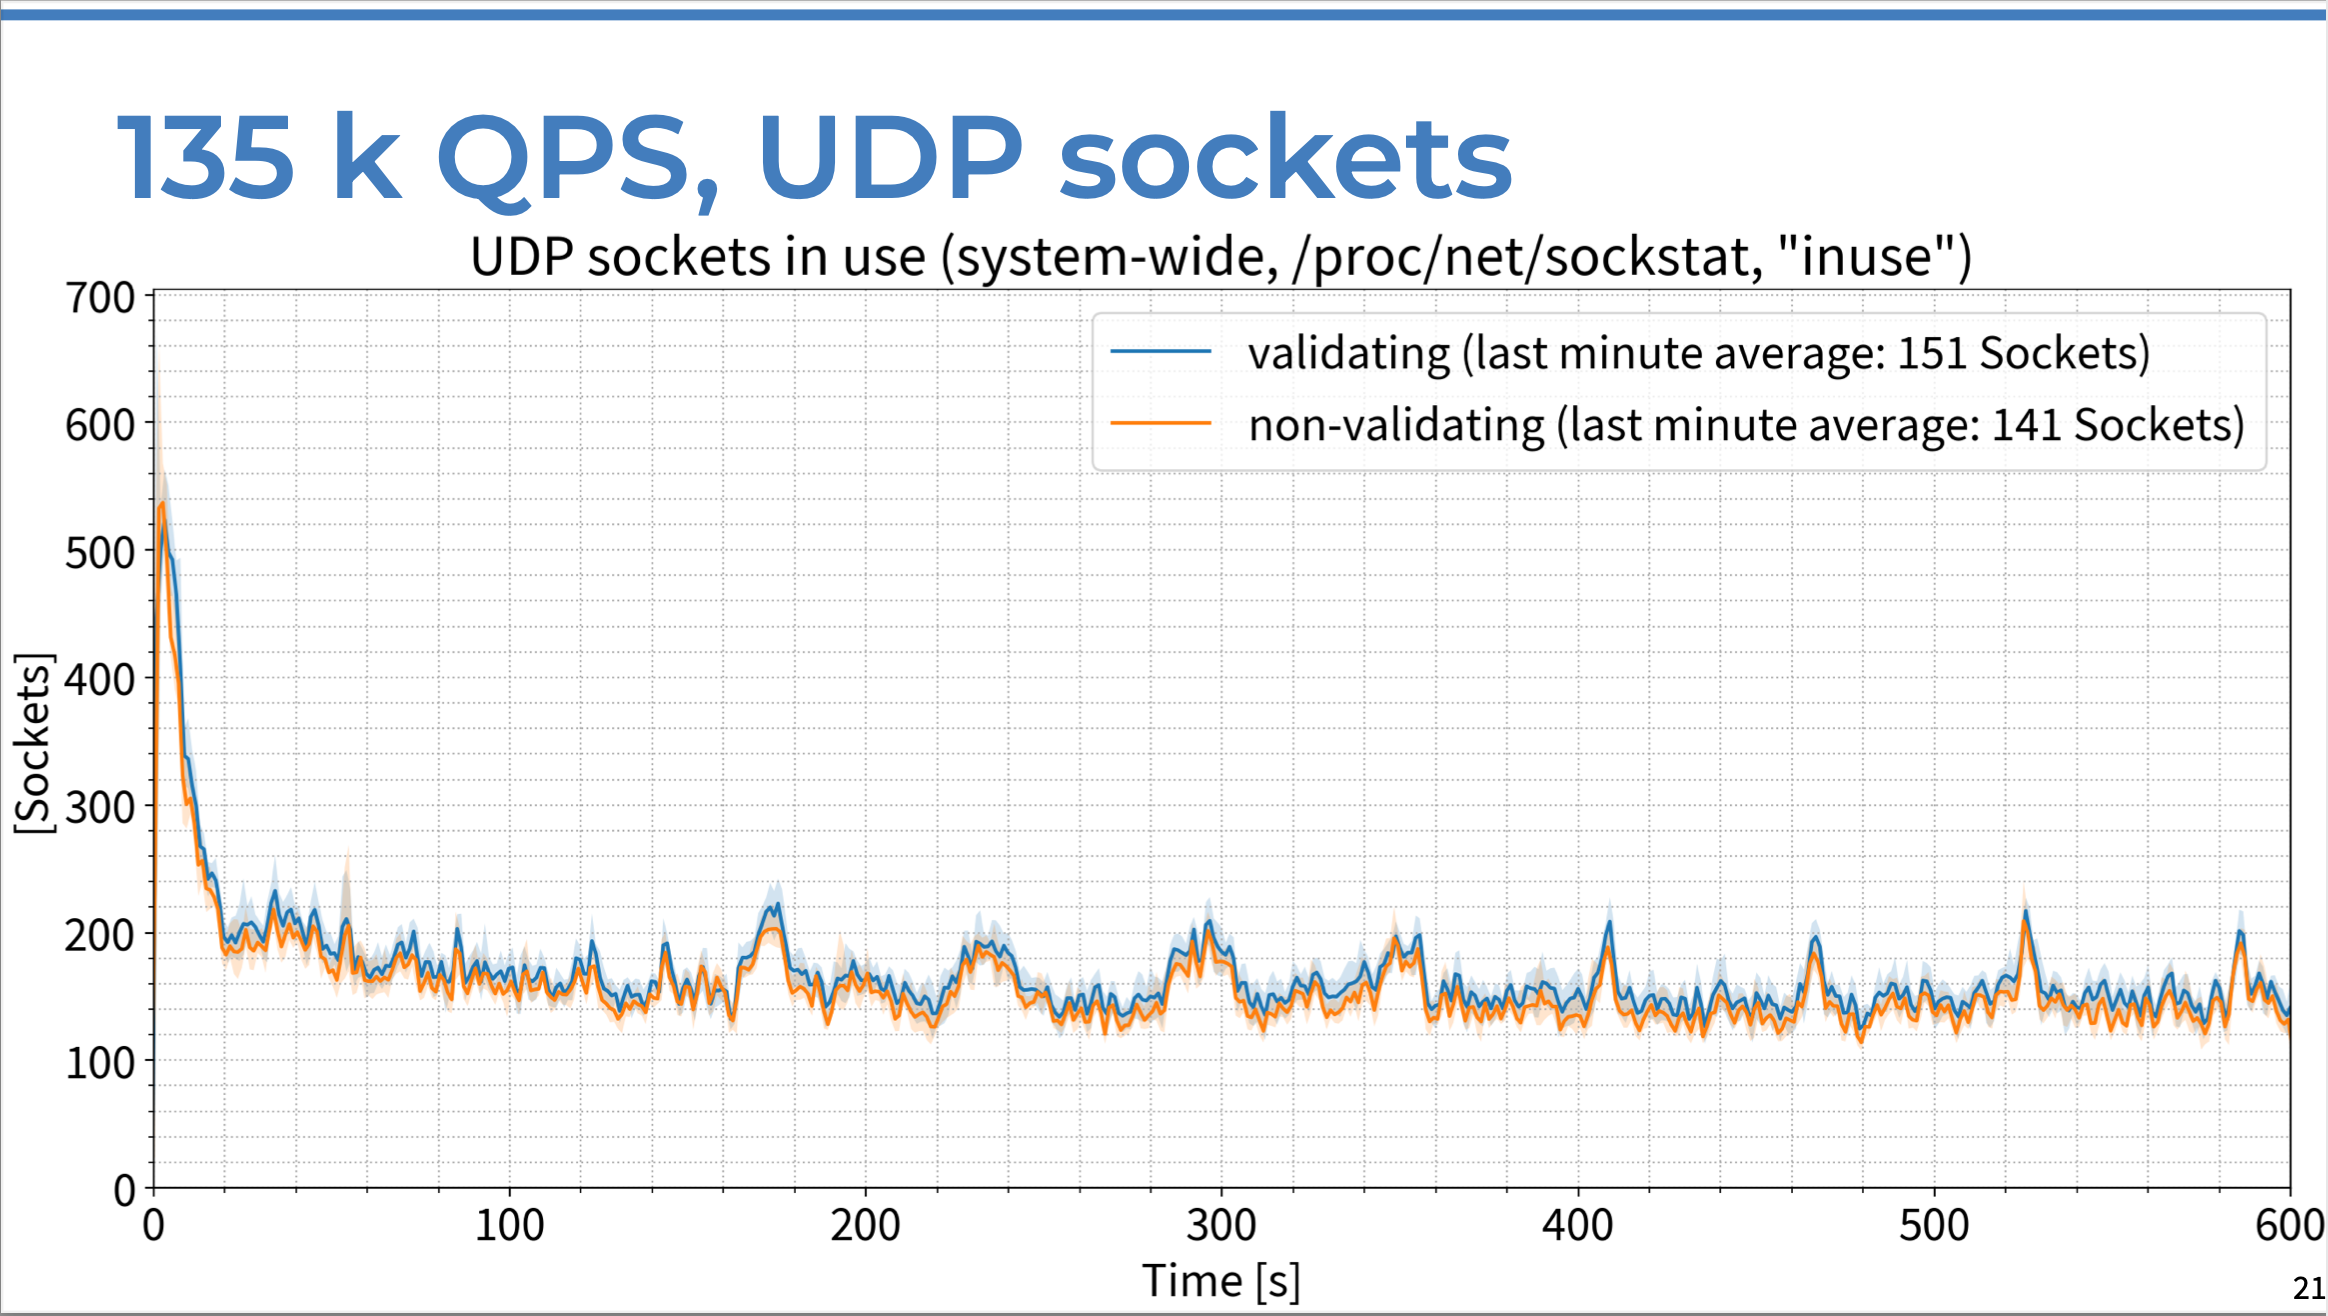 Chart of UDP sockets in use vs. time in seconds, comparing DNSSEC-validating resolver response to non-validating server response with 135K QPS.